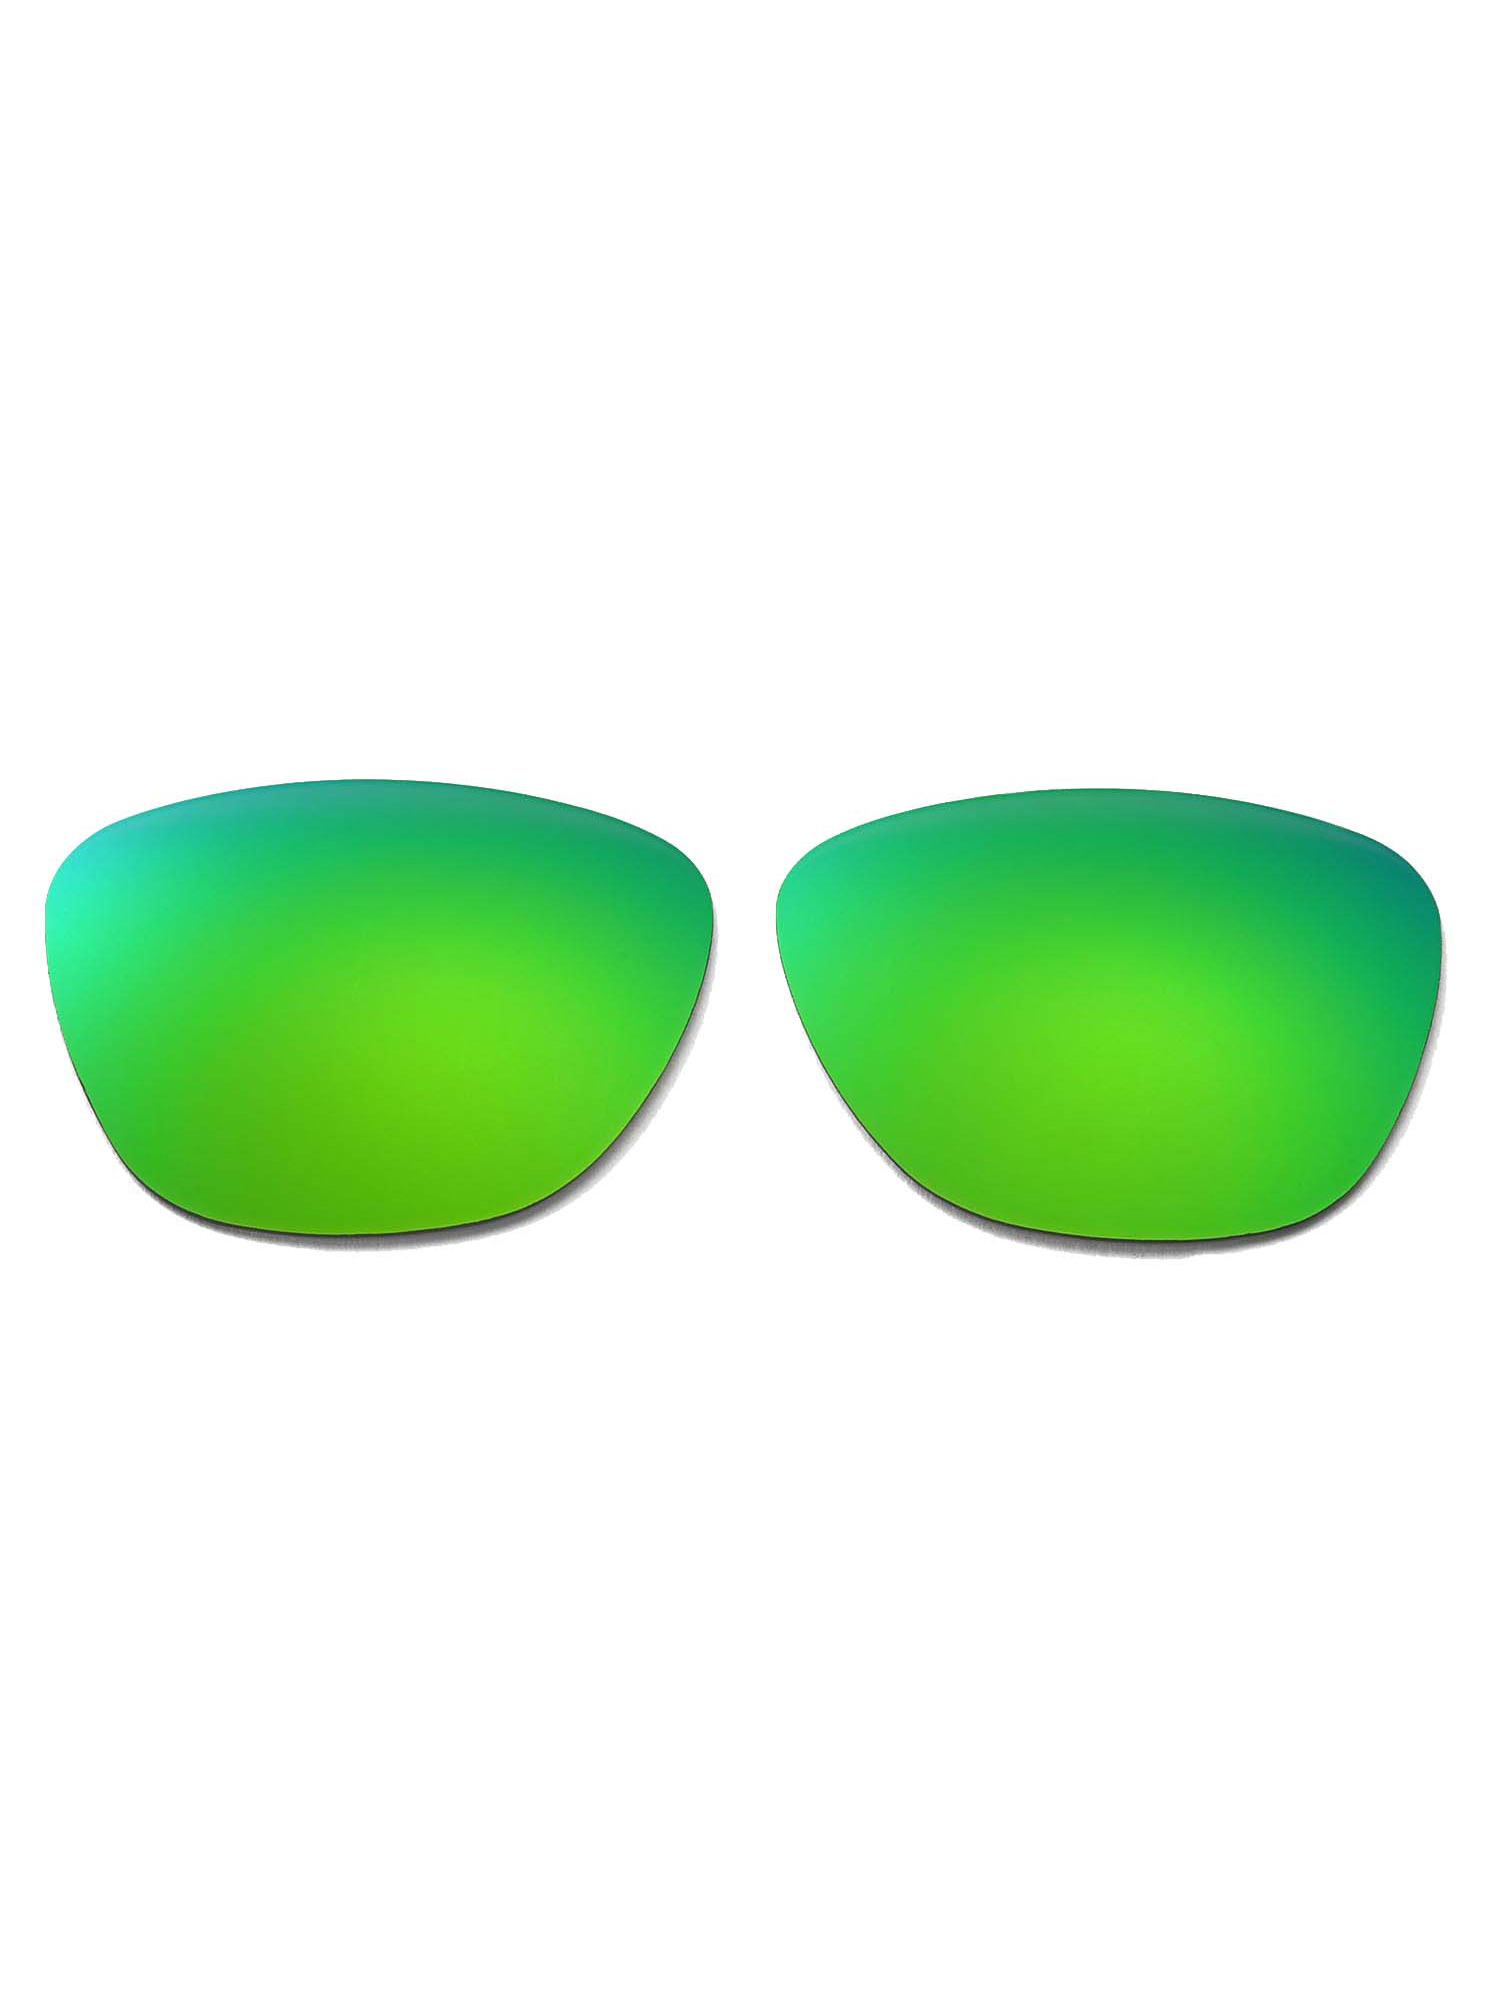 Walleva Emerald Polarized Replacement Lenses for Oakley Frogskins Sunglasses - image 3 of 6